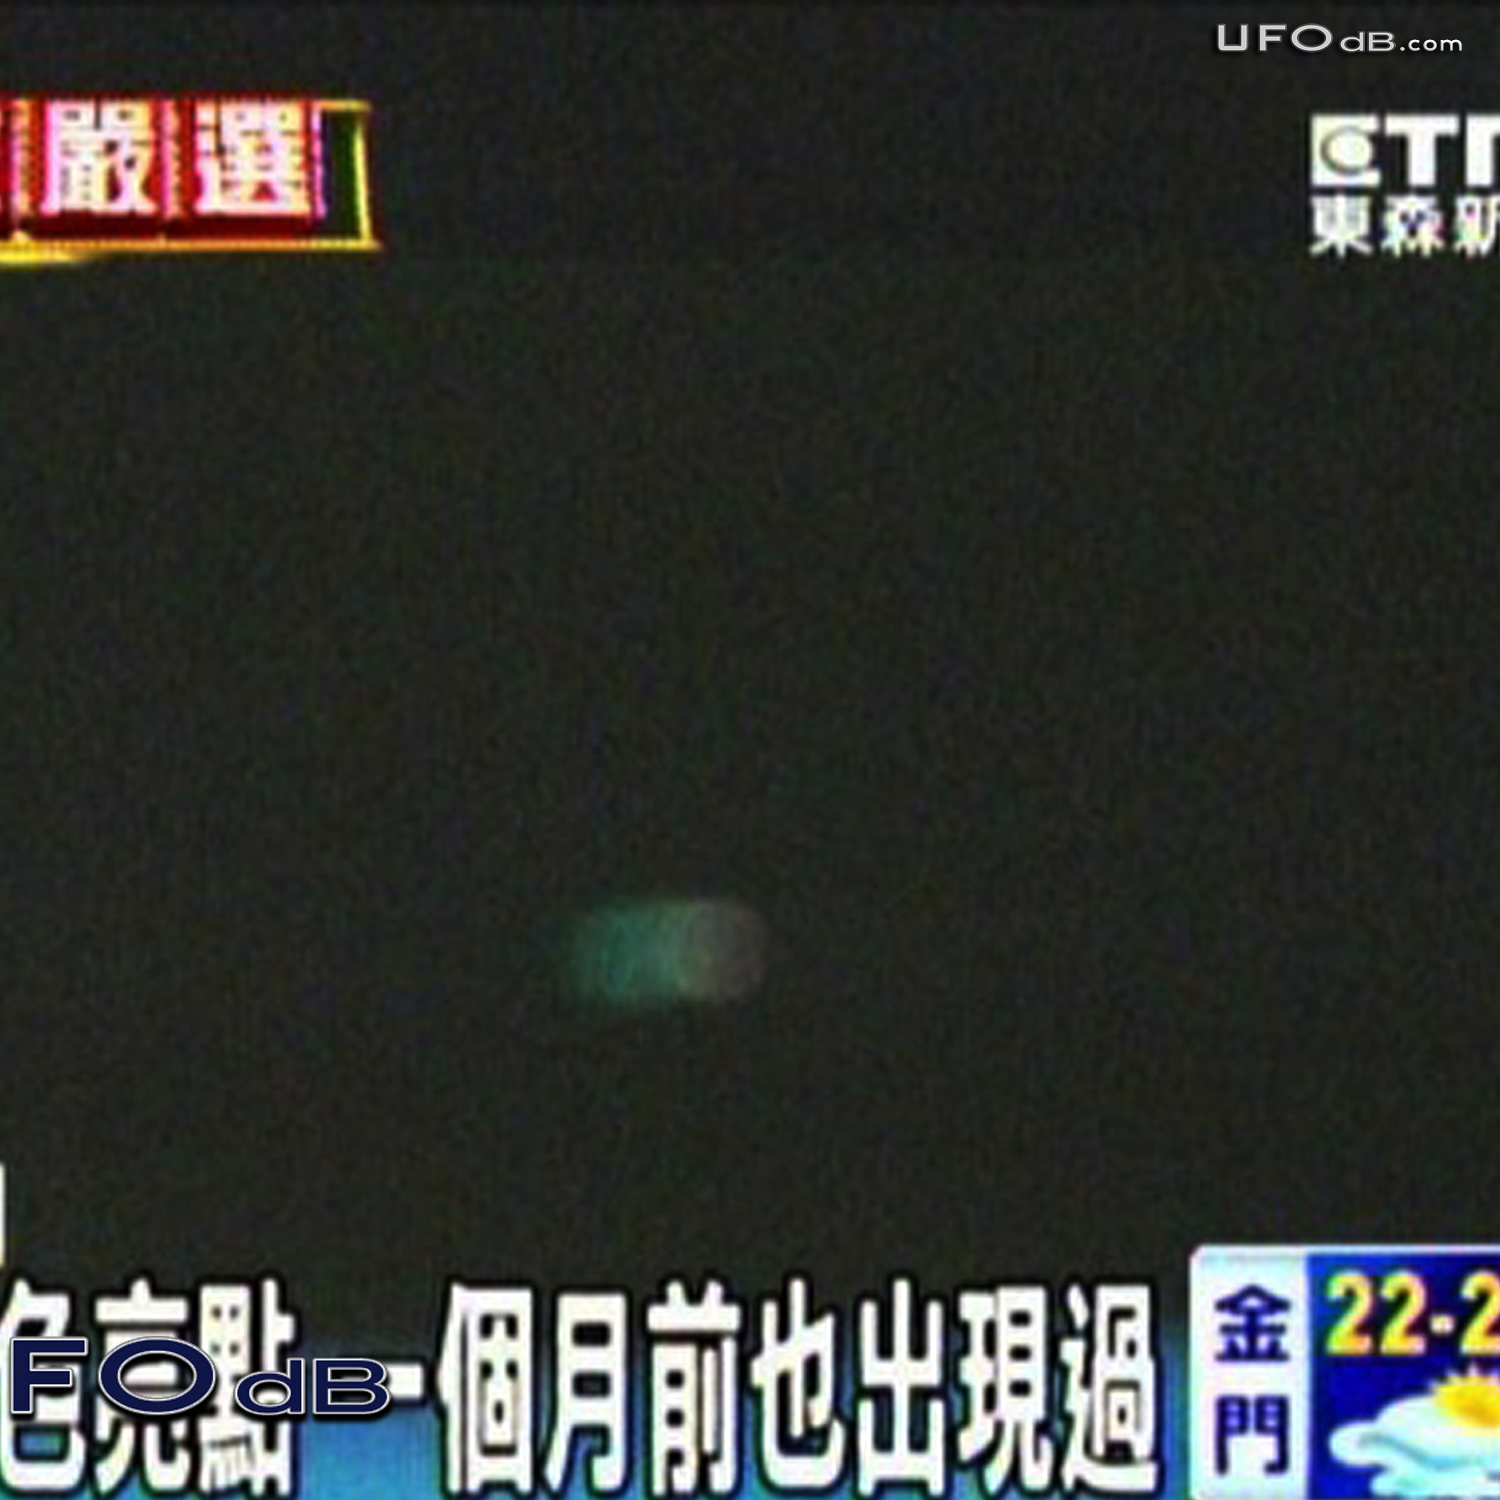 Taipei UFO picture shown on the local Television | Taiwan | May 7 2011 UFO Picture #287-2